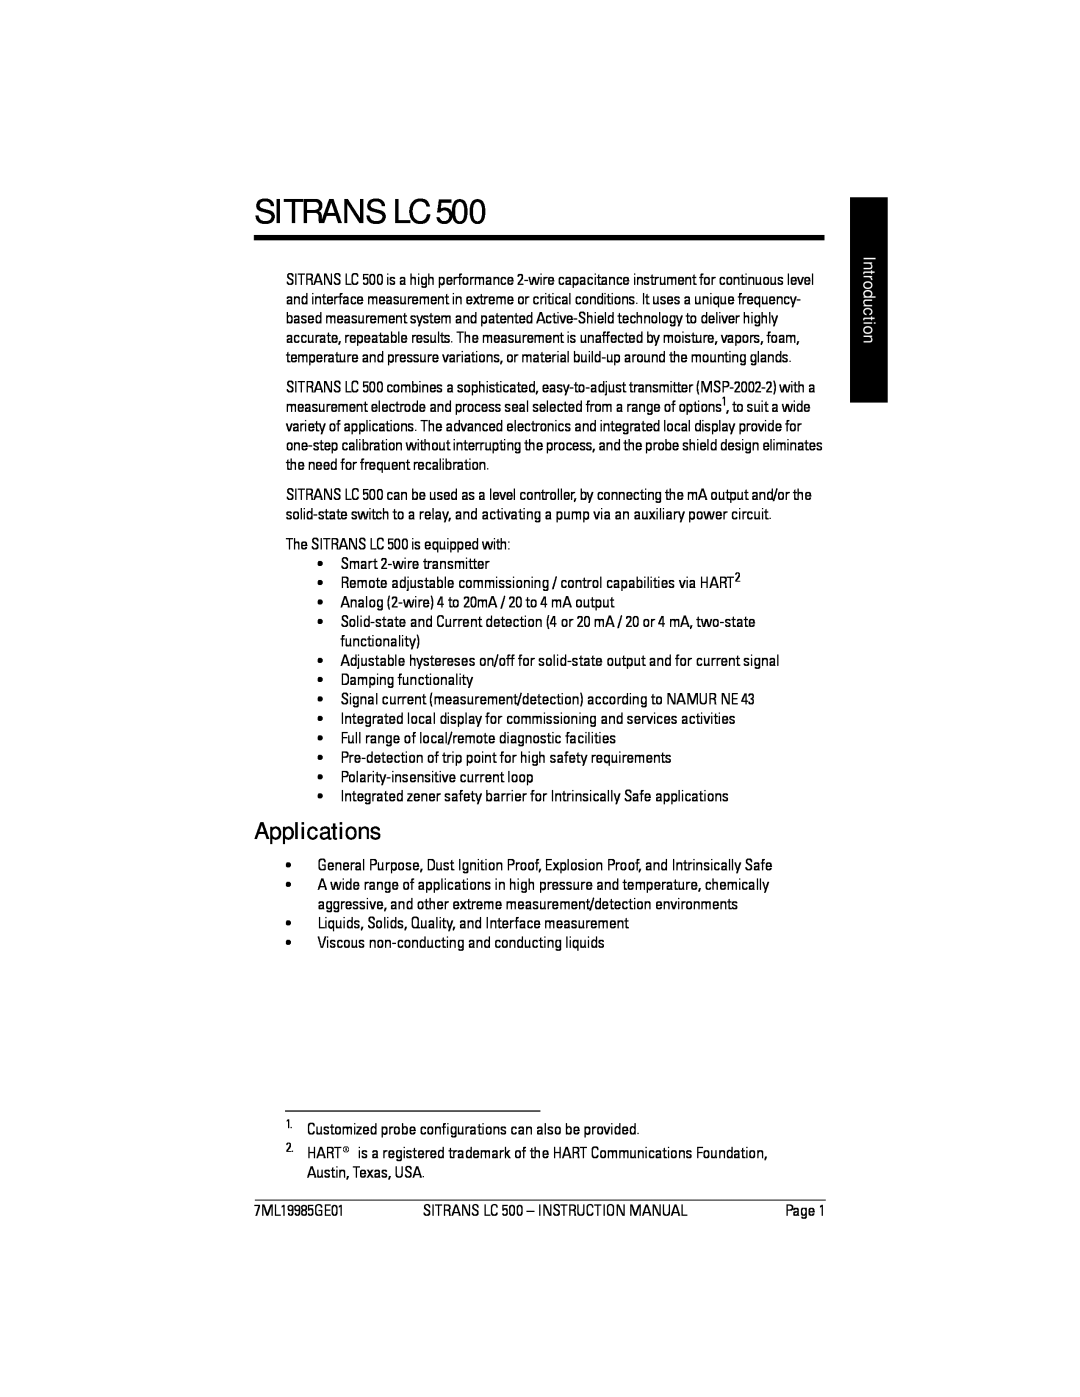 Siemens LC 500 instruction manual Sitrans Lc, Applications, Introduction 